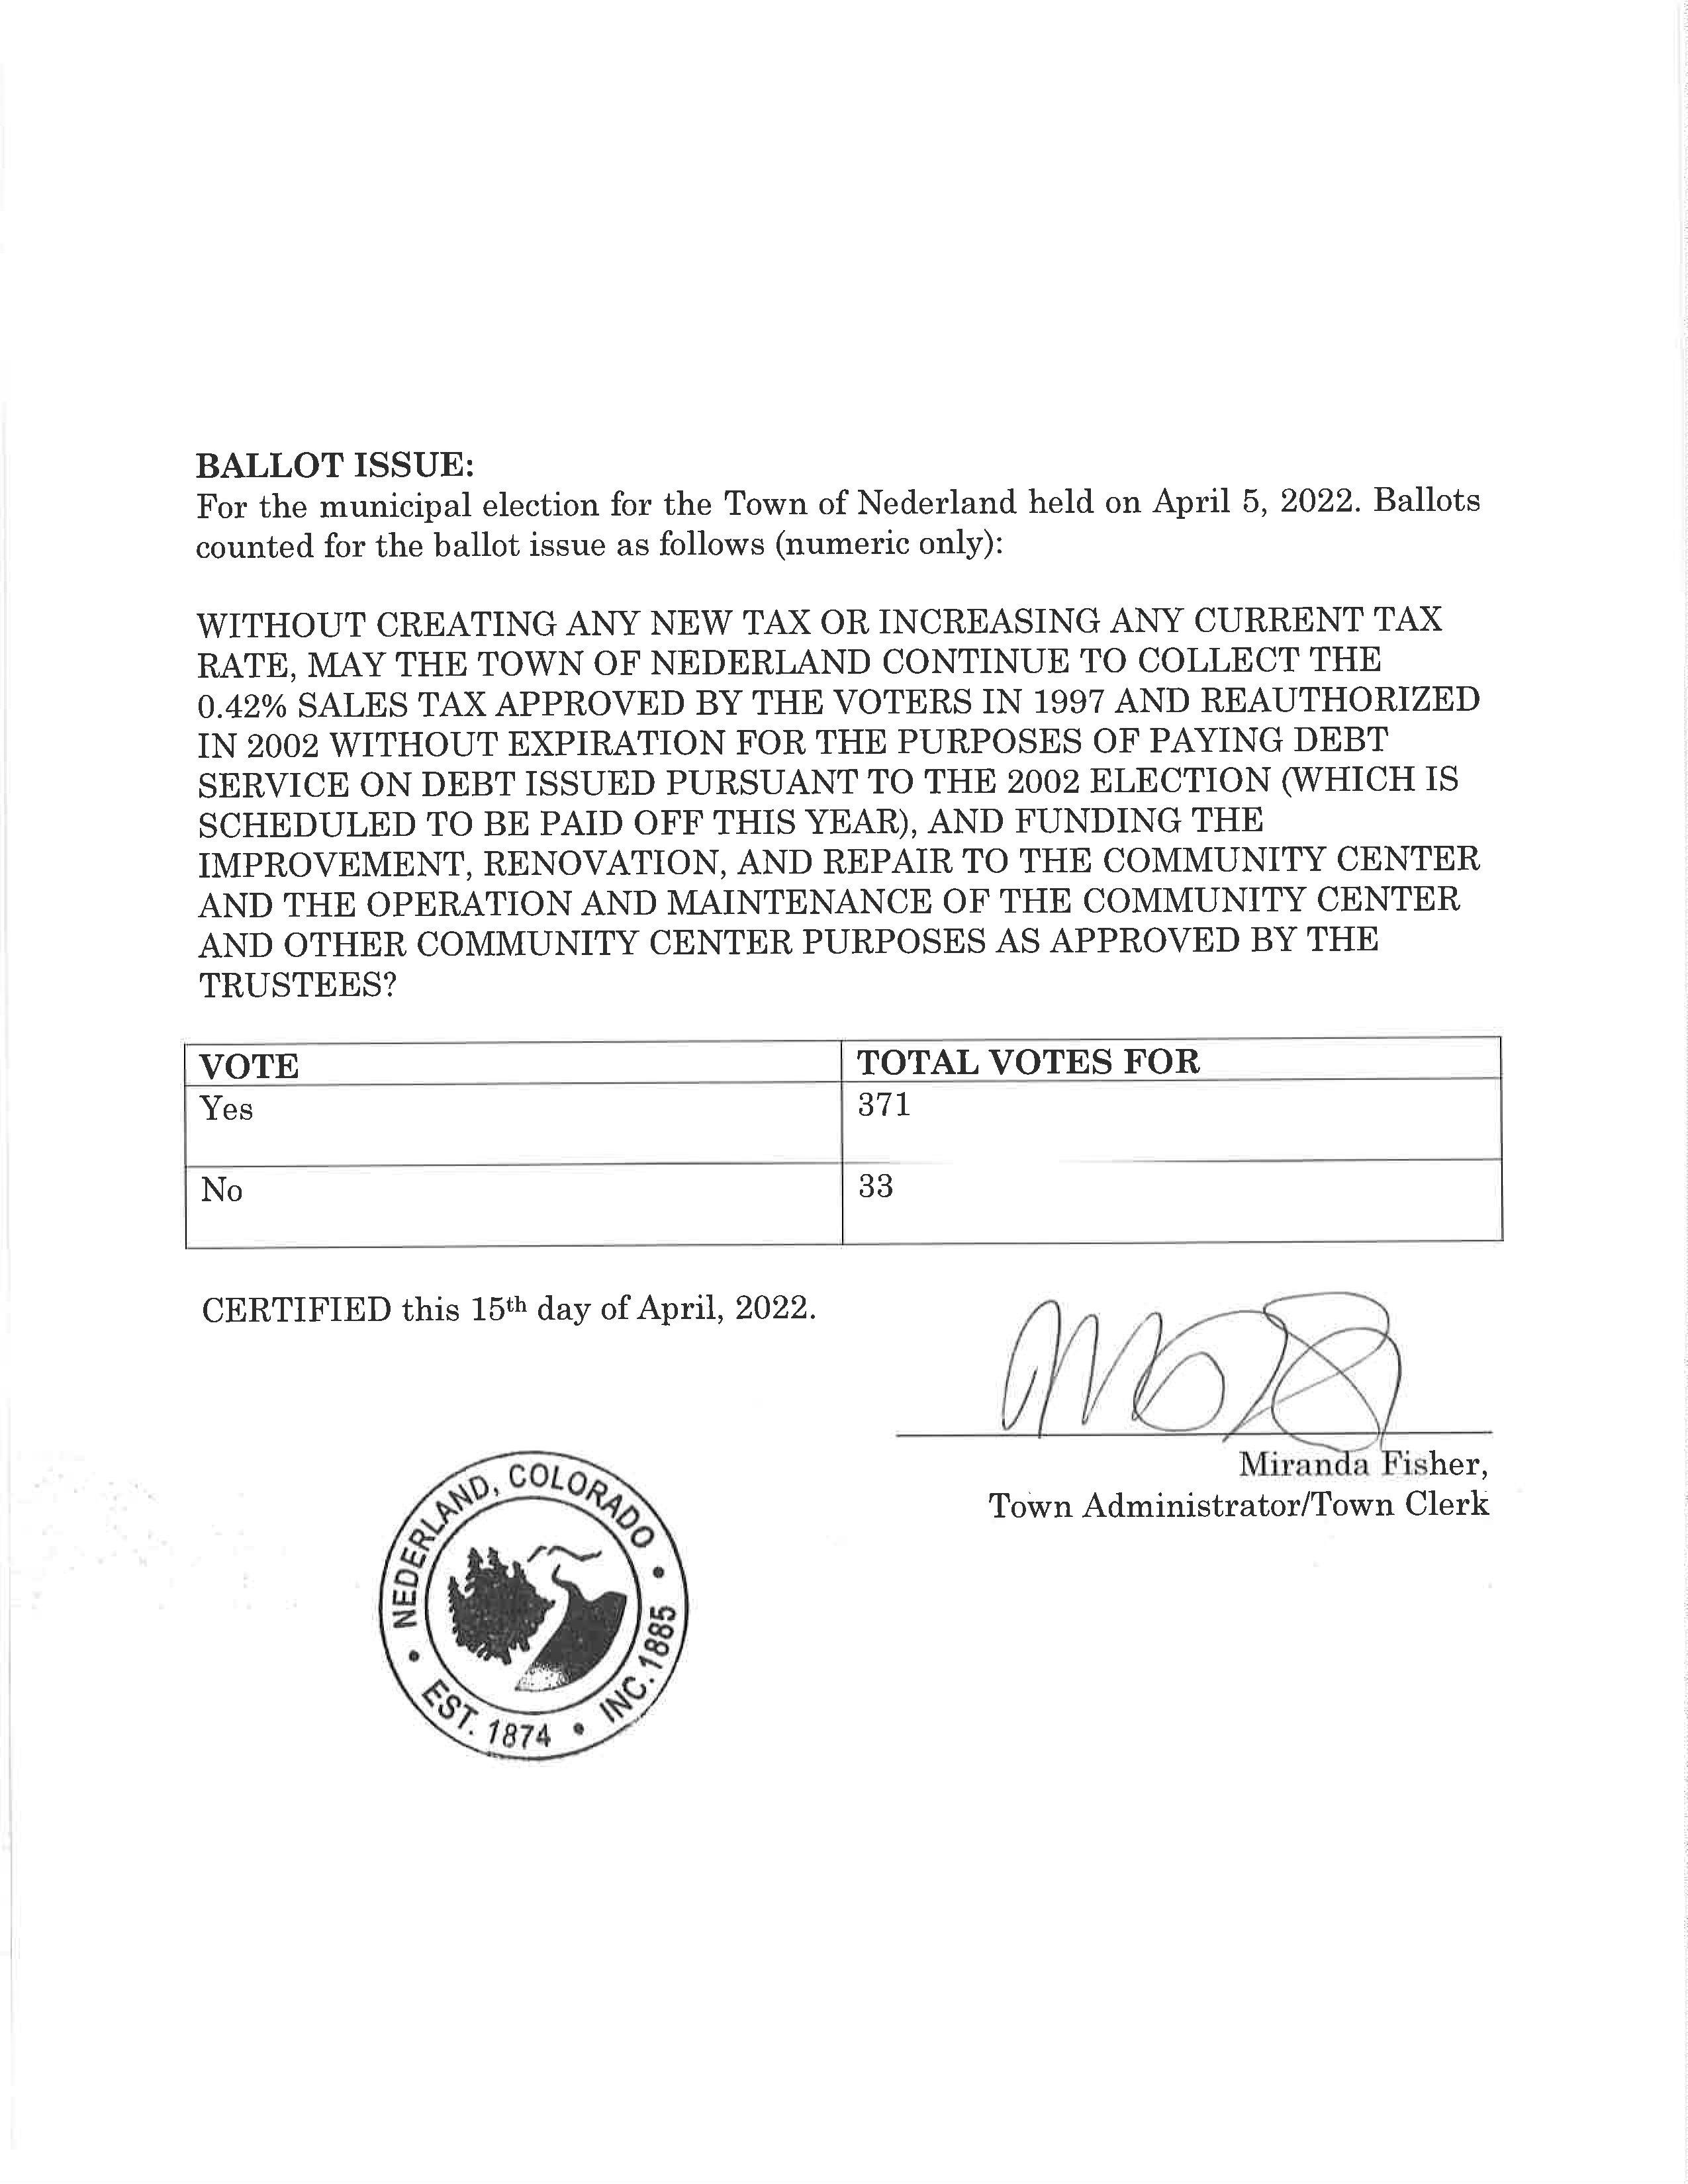 Page two of the Canvass Board's Certificate of Official Abstract of Votes Cast for Town of Nederland Municipal Election. These results are also available at https://townofnederland.colorado.gov/2022election